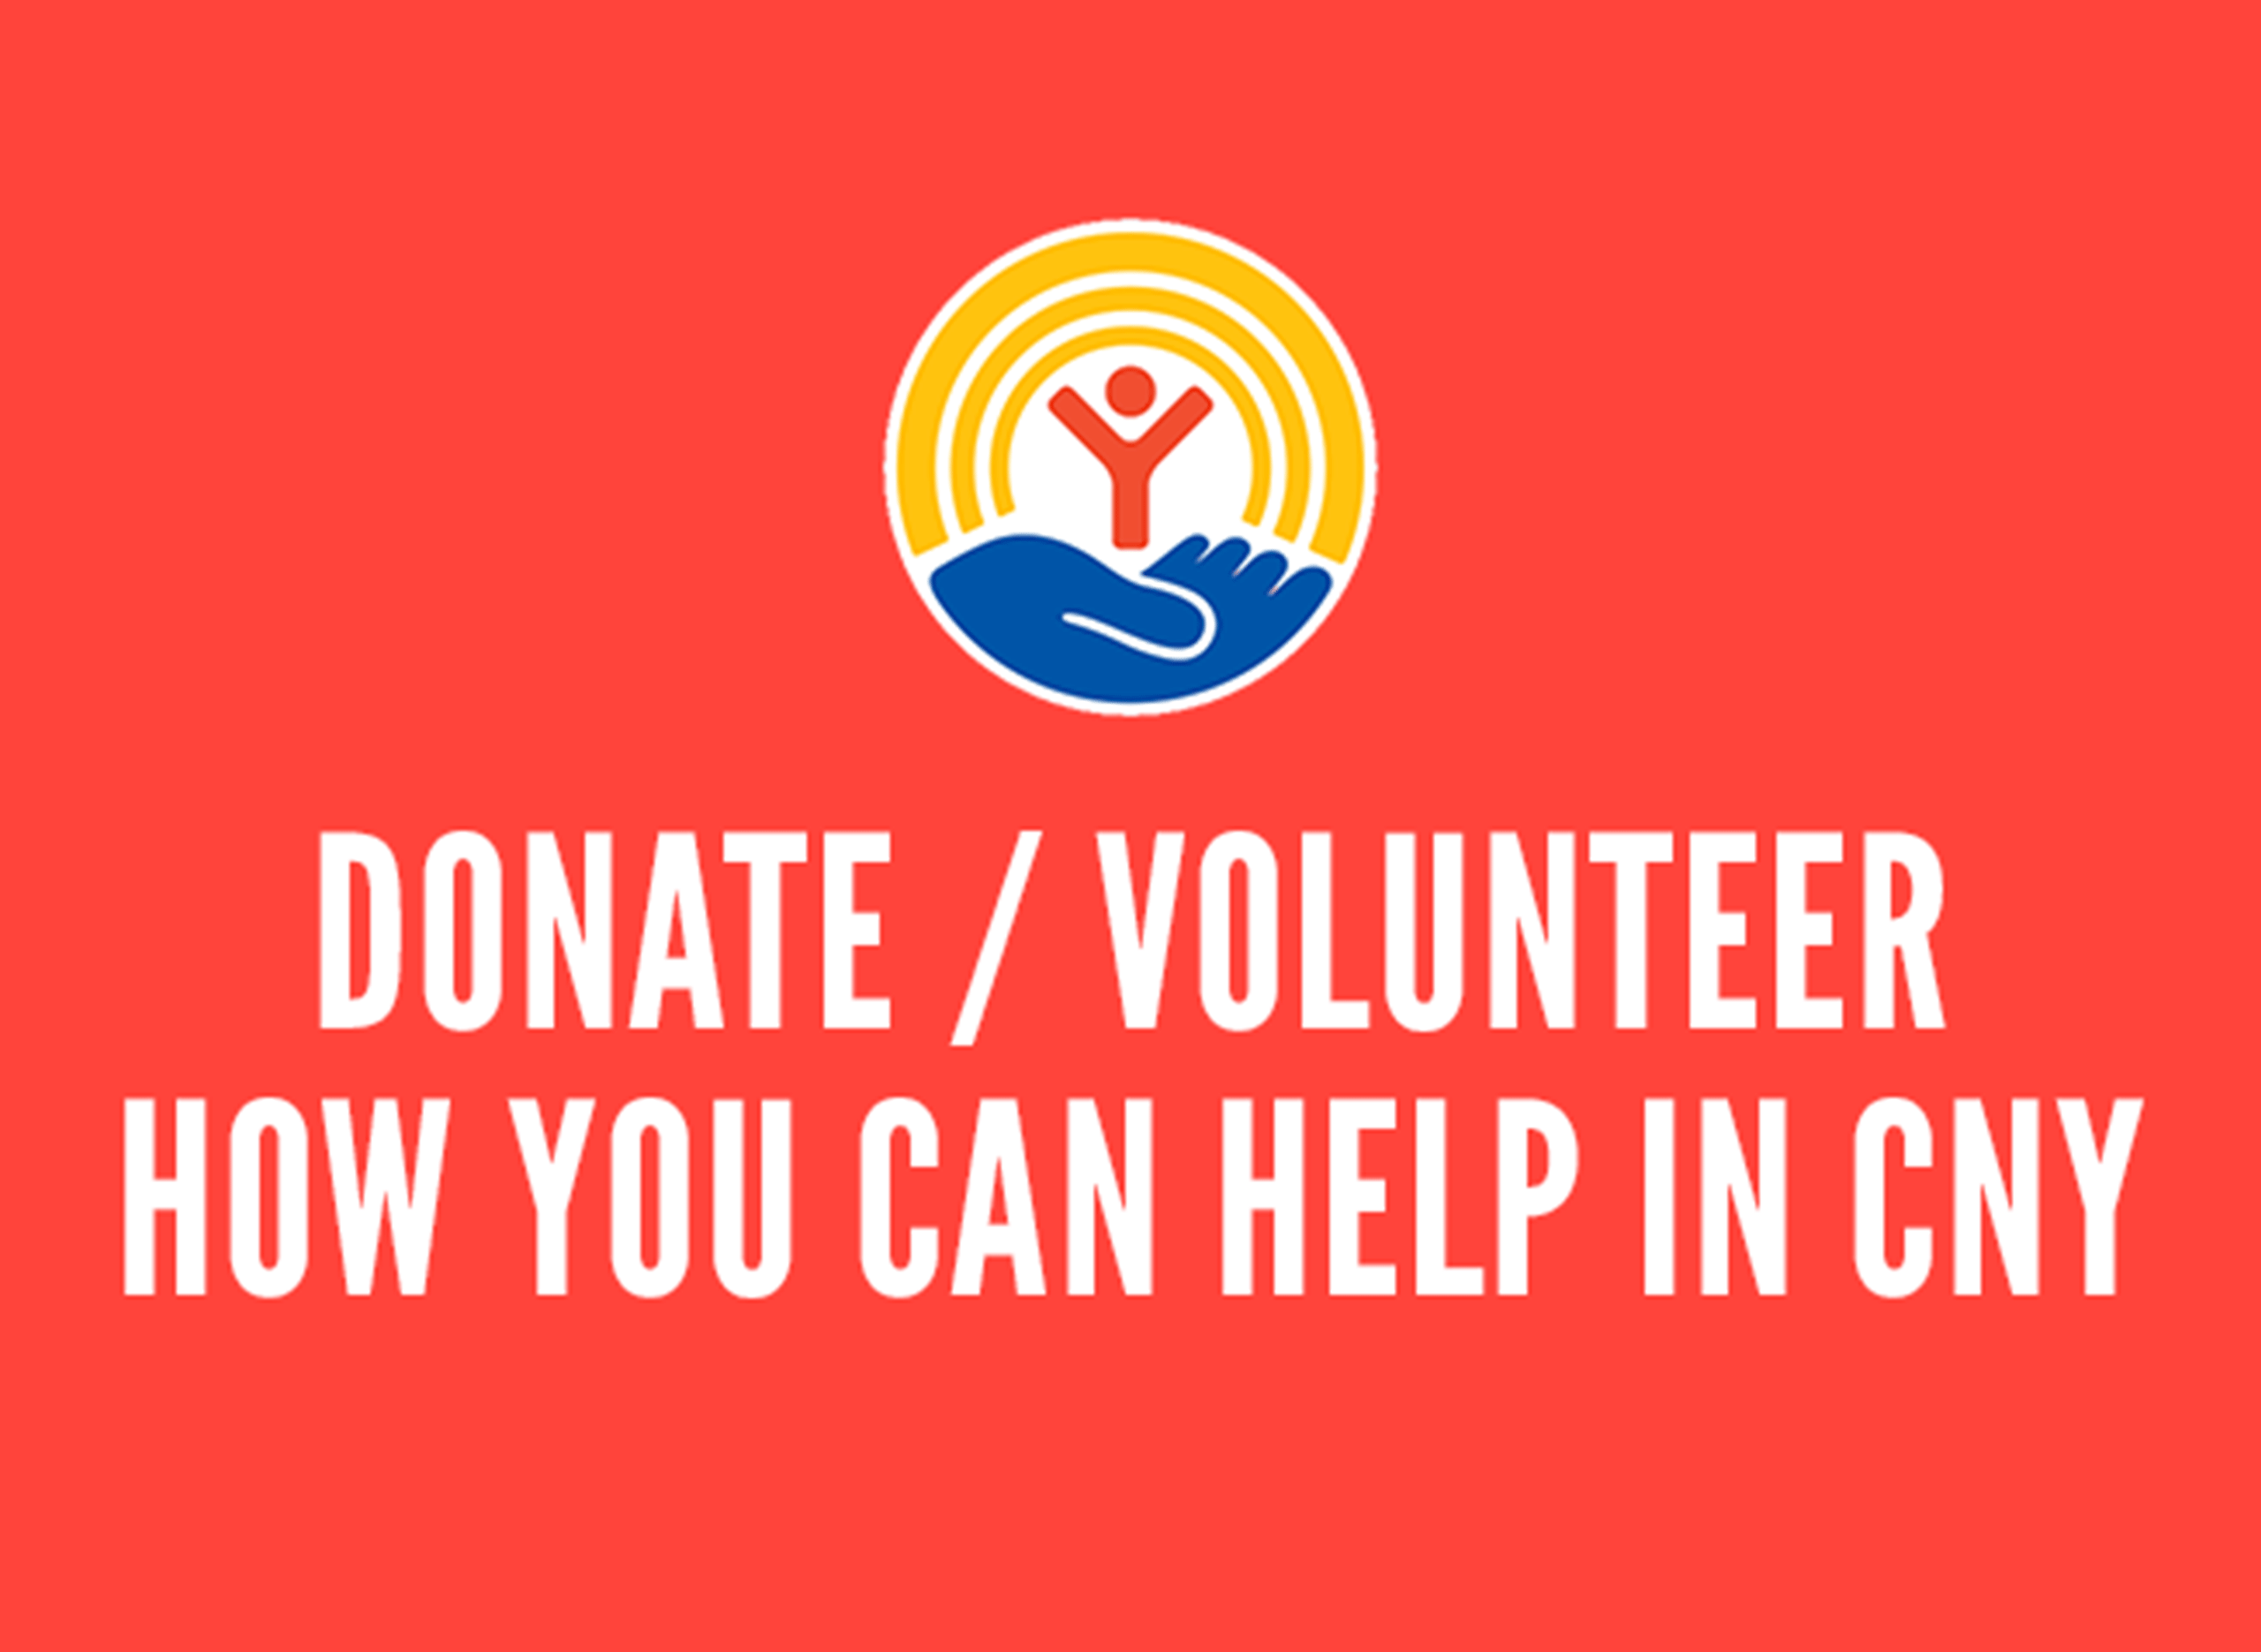 Donate/Volunteer: How You Can Help in CNY